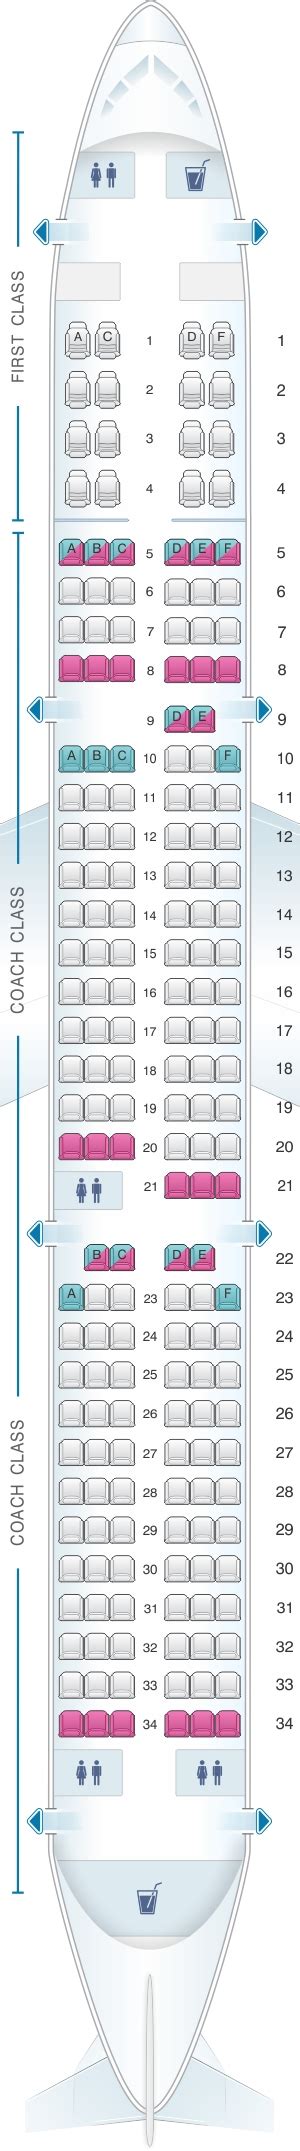 Airbus A Seating Layout Images And Photos Finder